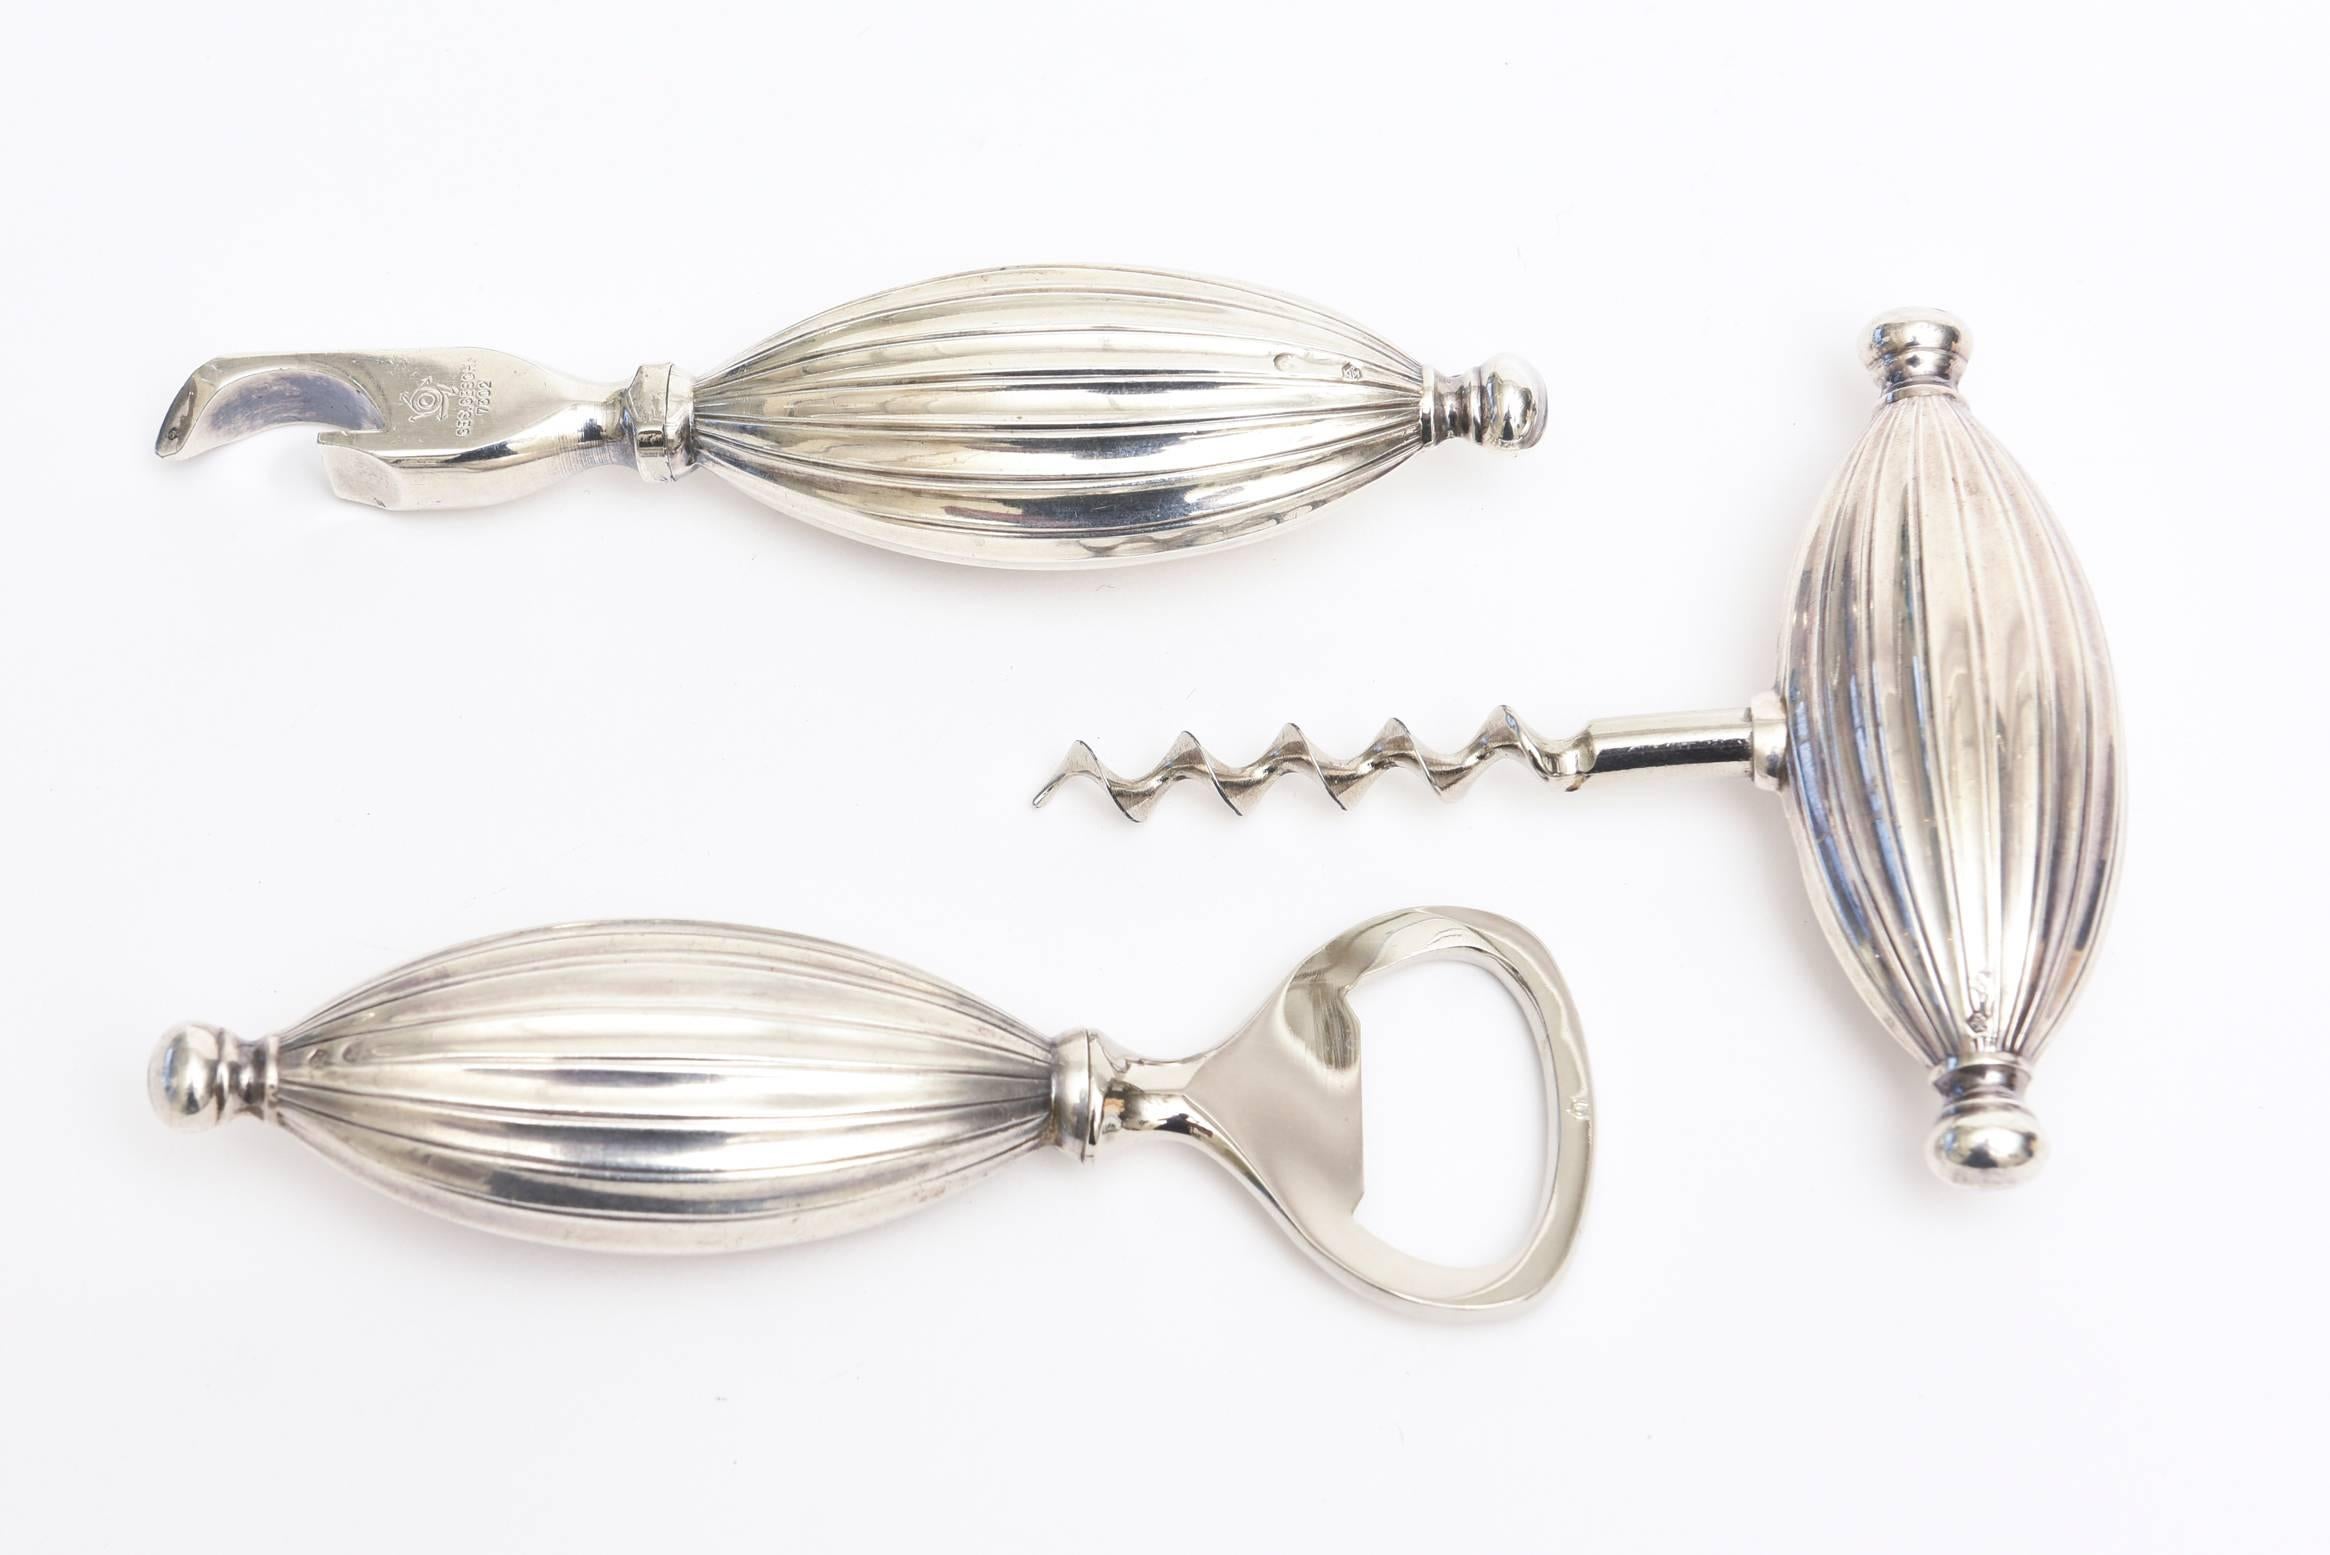 This beautiful weight German Mid-Century Modern sterling silver hallmarked and signed Ges.Gesch 7302 barware set is so gorgeous with its sculptural forms. Looks like jewelry. It consists of two different kinds of bottle openers and a corkscrew.
This